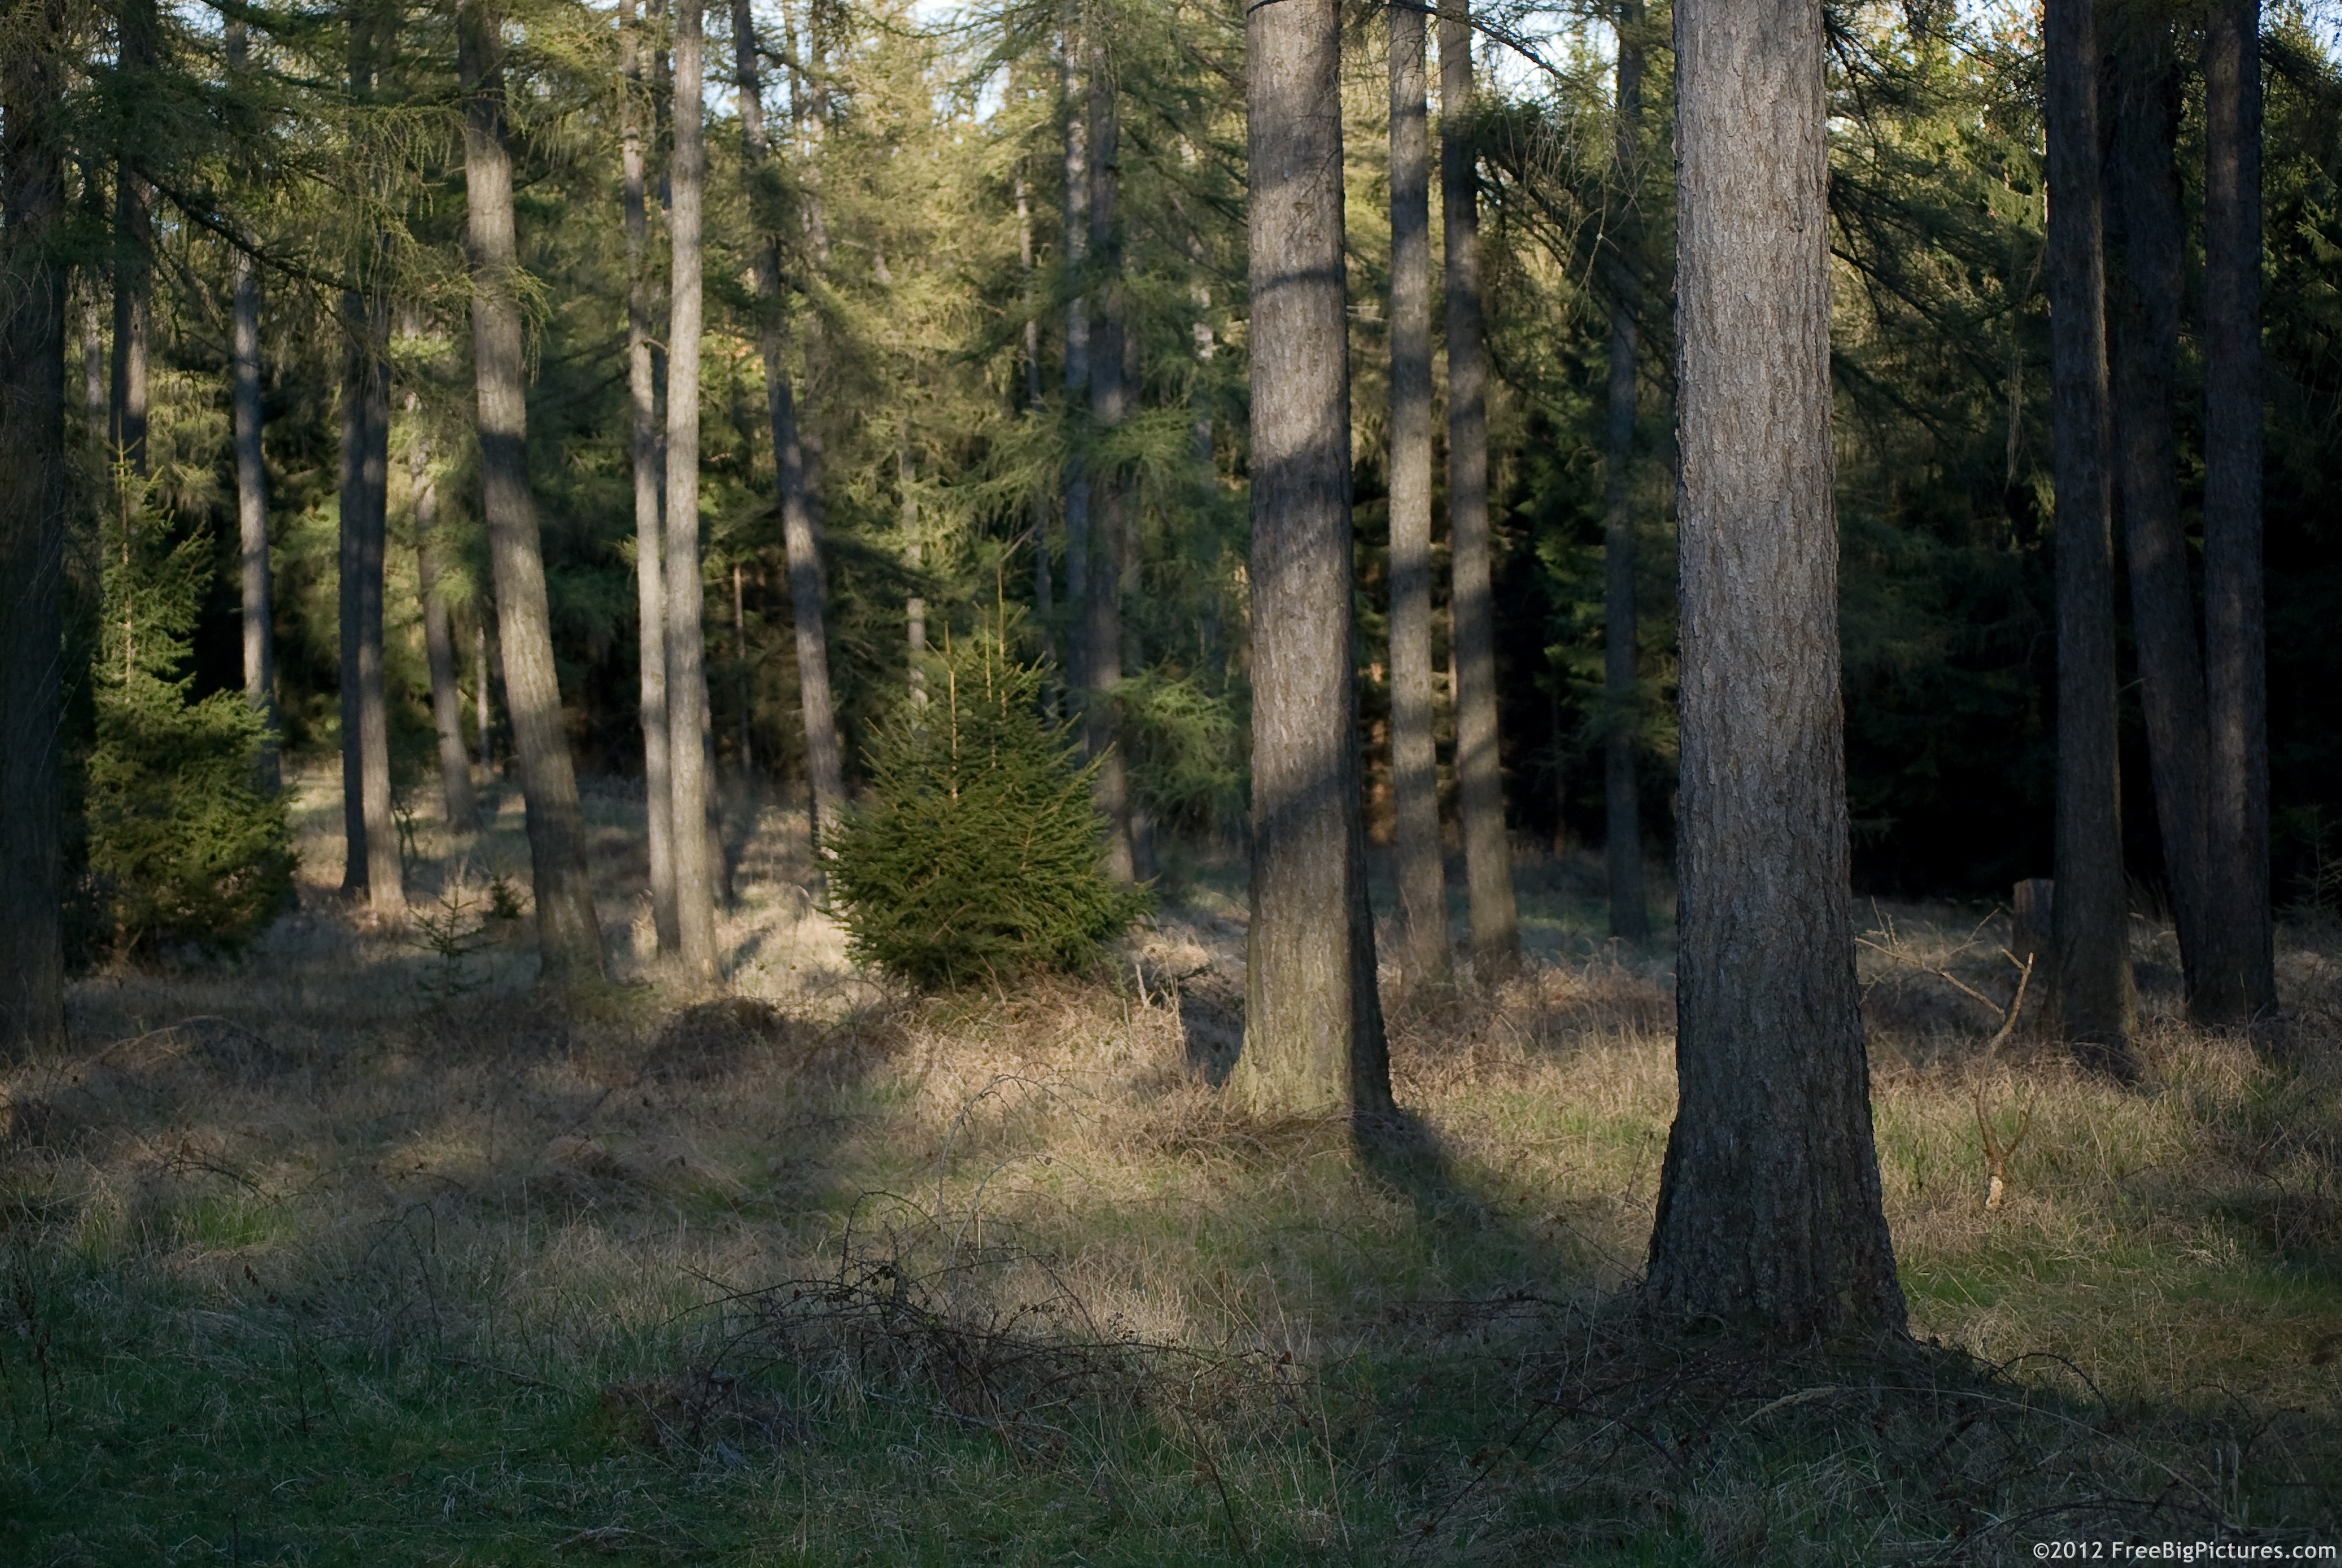 A coniferous forest with a grassy soil stretch bathed in the sun rays which are penetrating between the trees, on a beautiful day. Also, a few green small firs are visible.